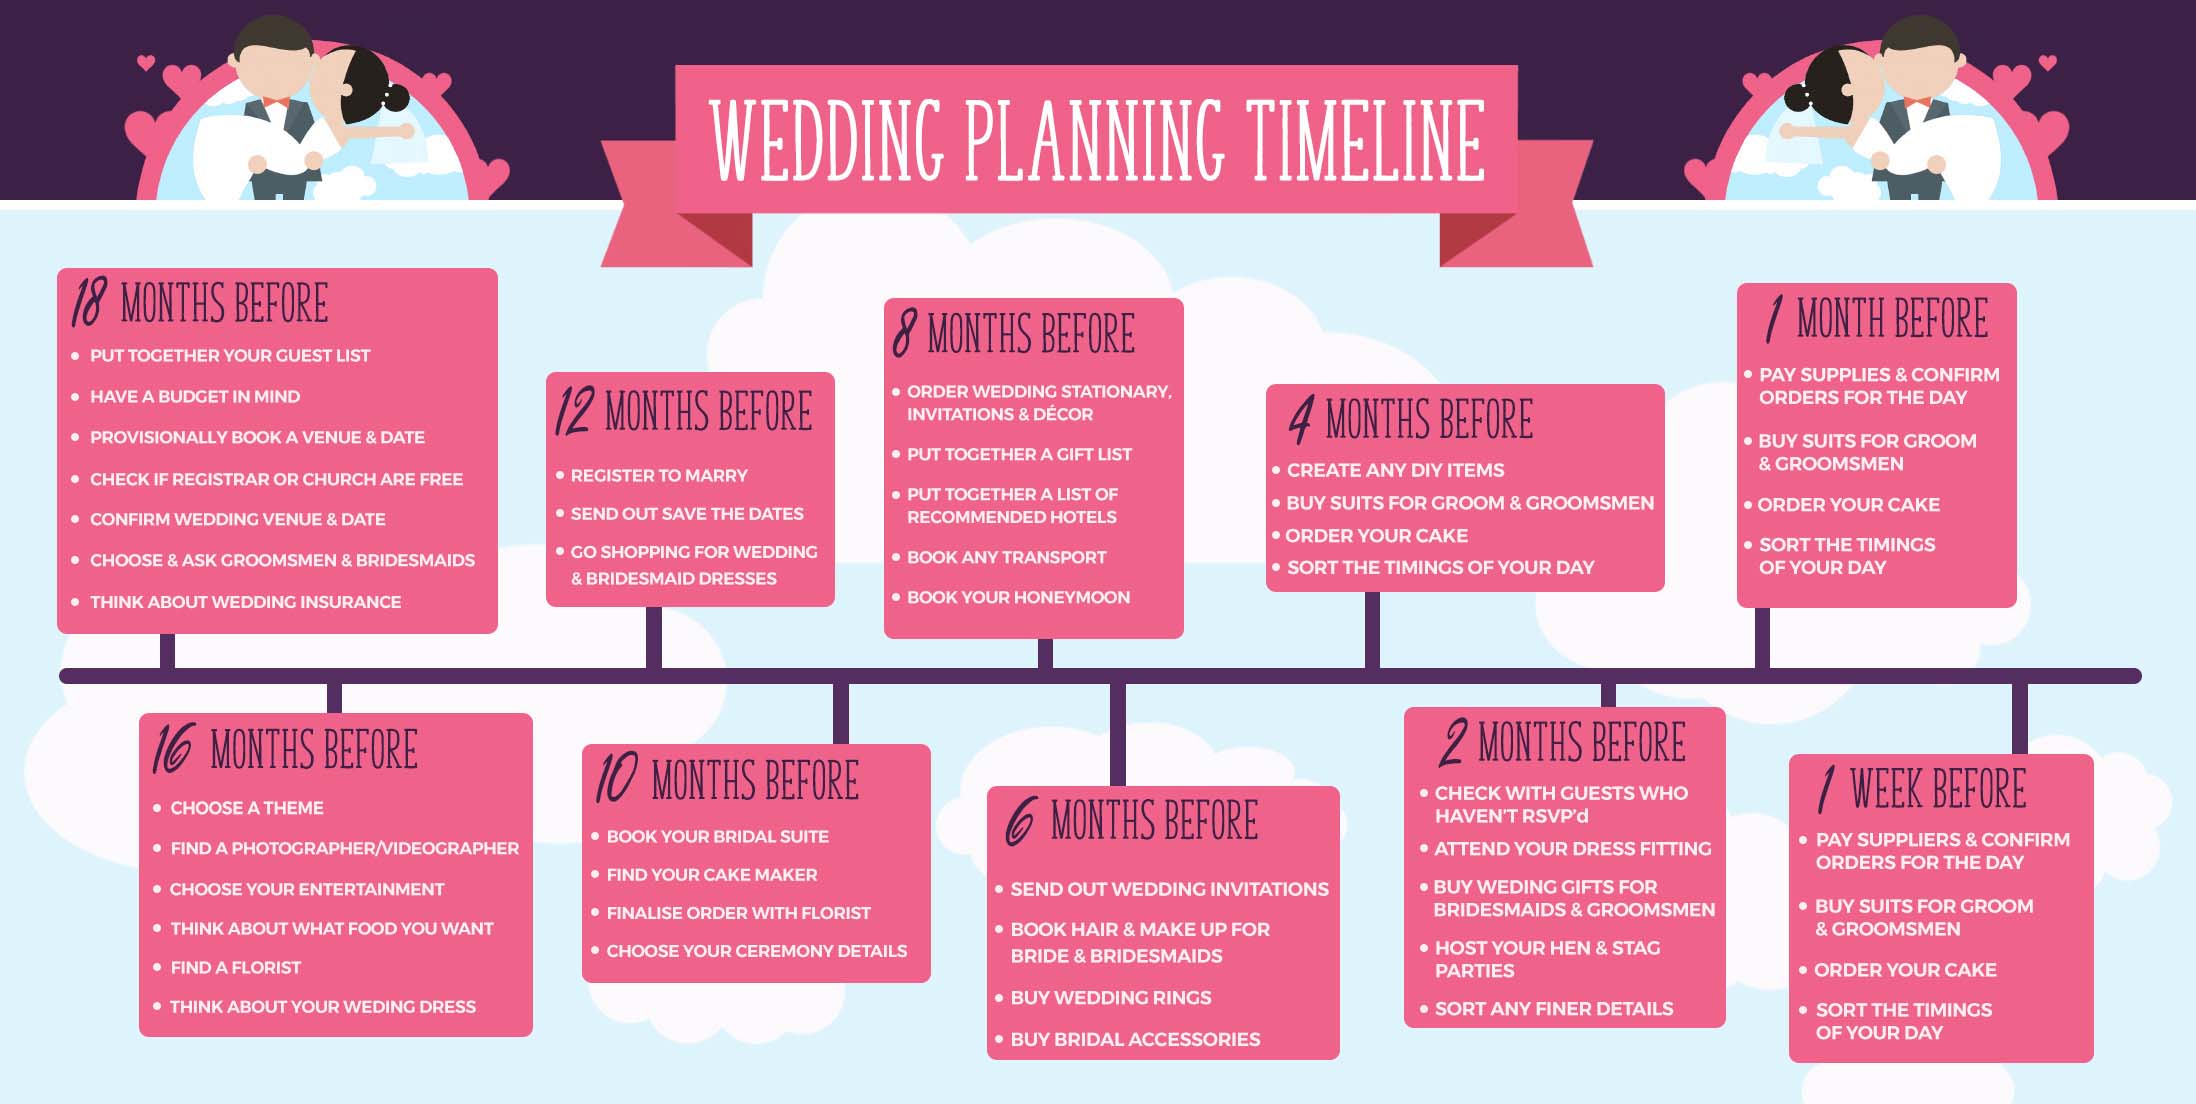 How to Plan a Wedding in 4 Simple Sections - Timeline